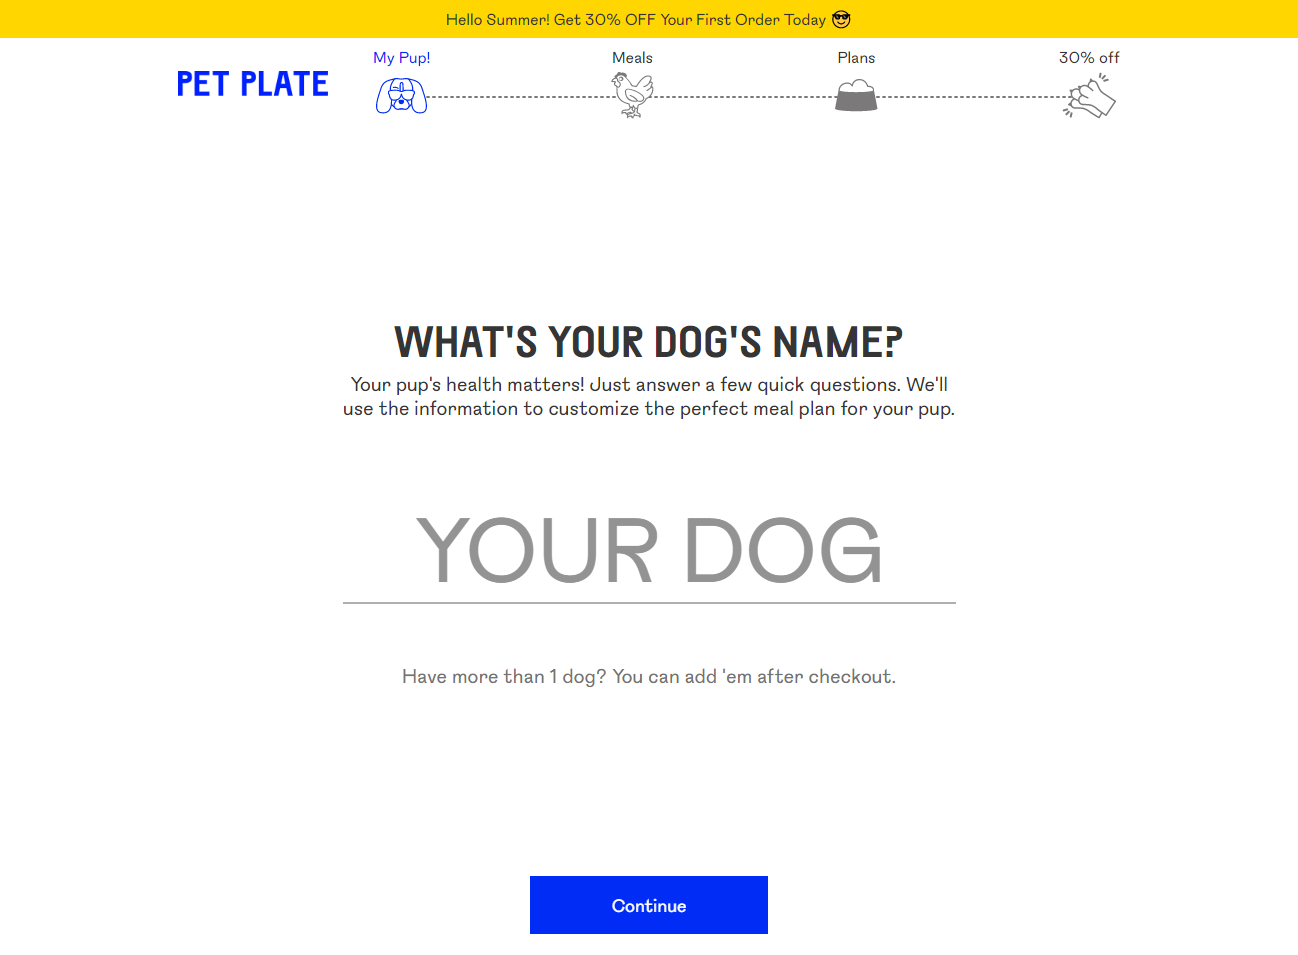 Dog Food Subscription  Sign Up for Dog Food Delivery Service   Pet Plate   Pet Plate.png